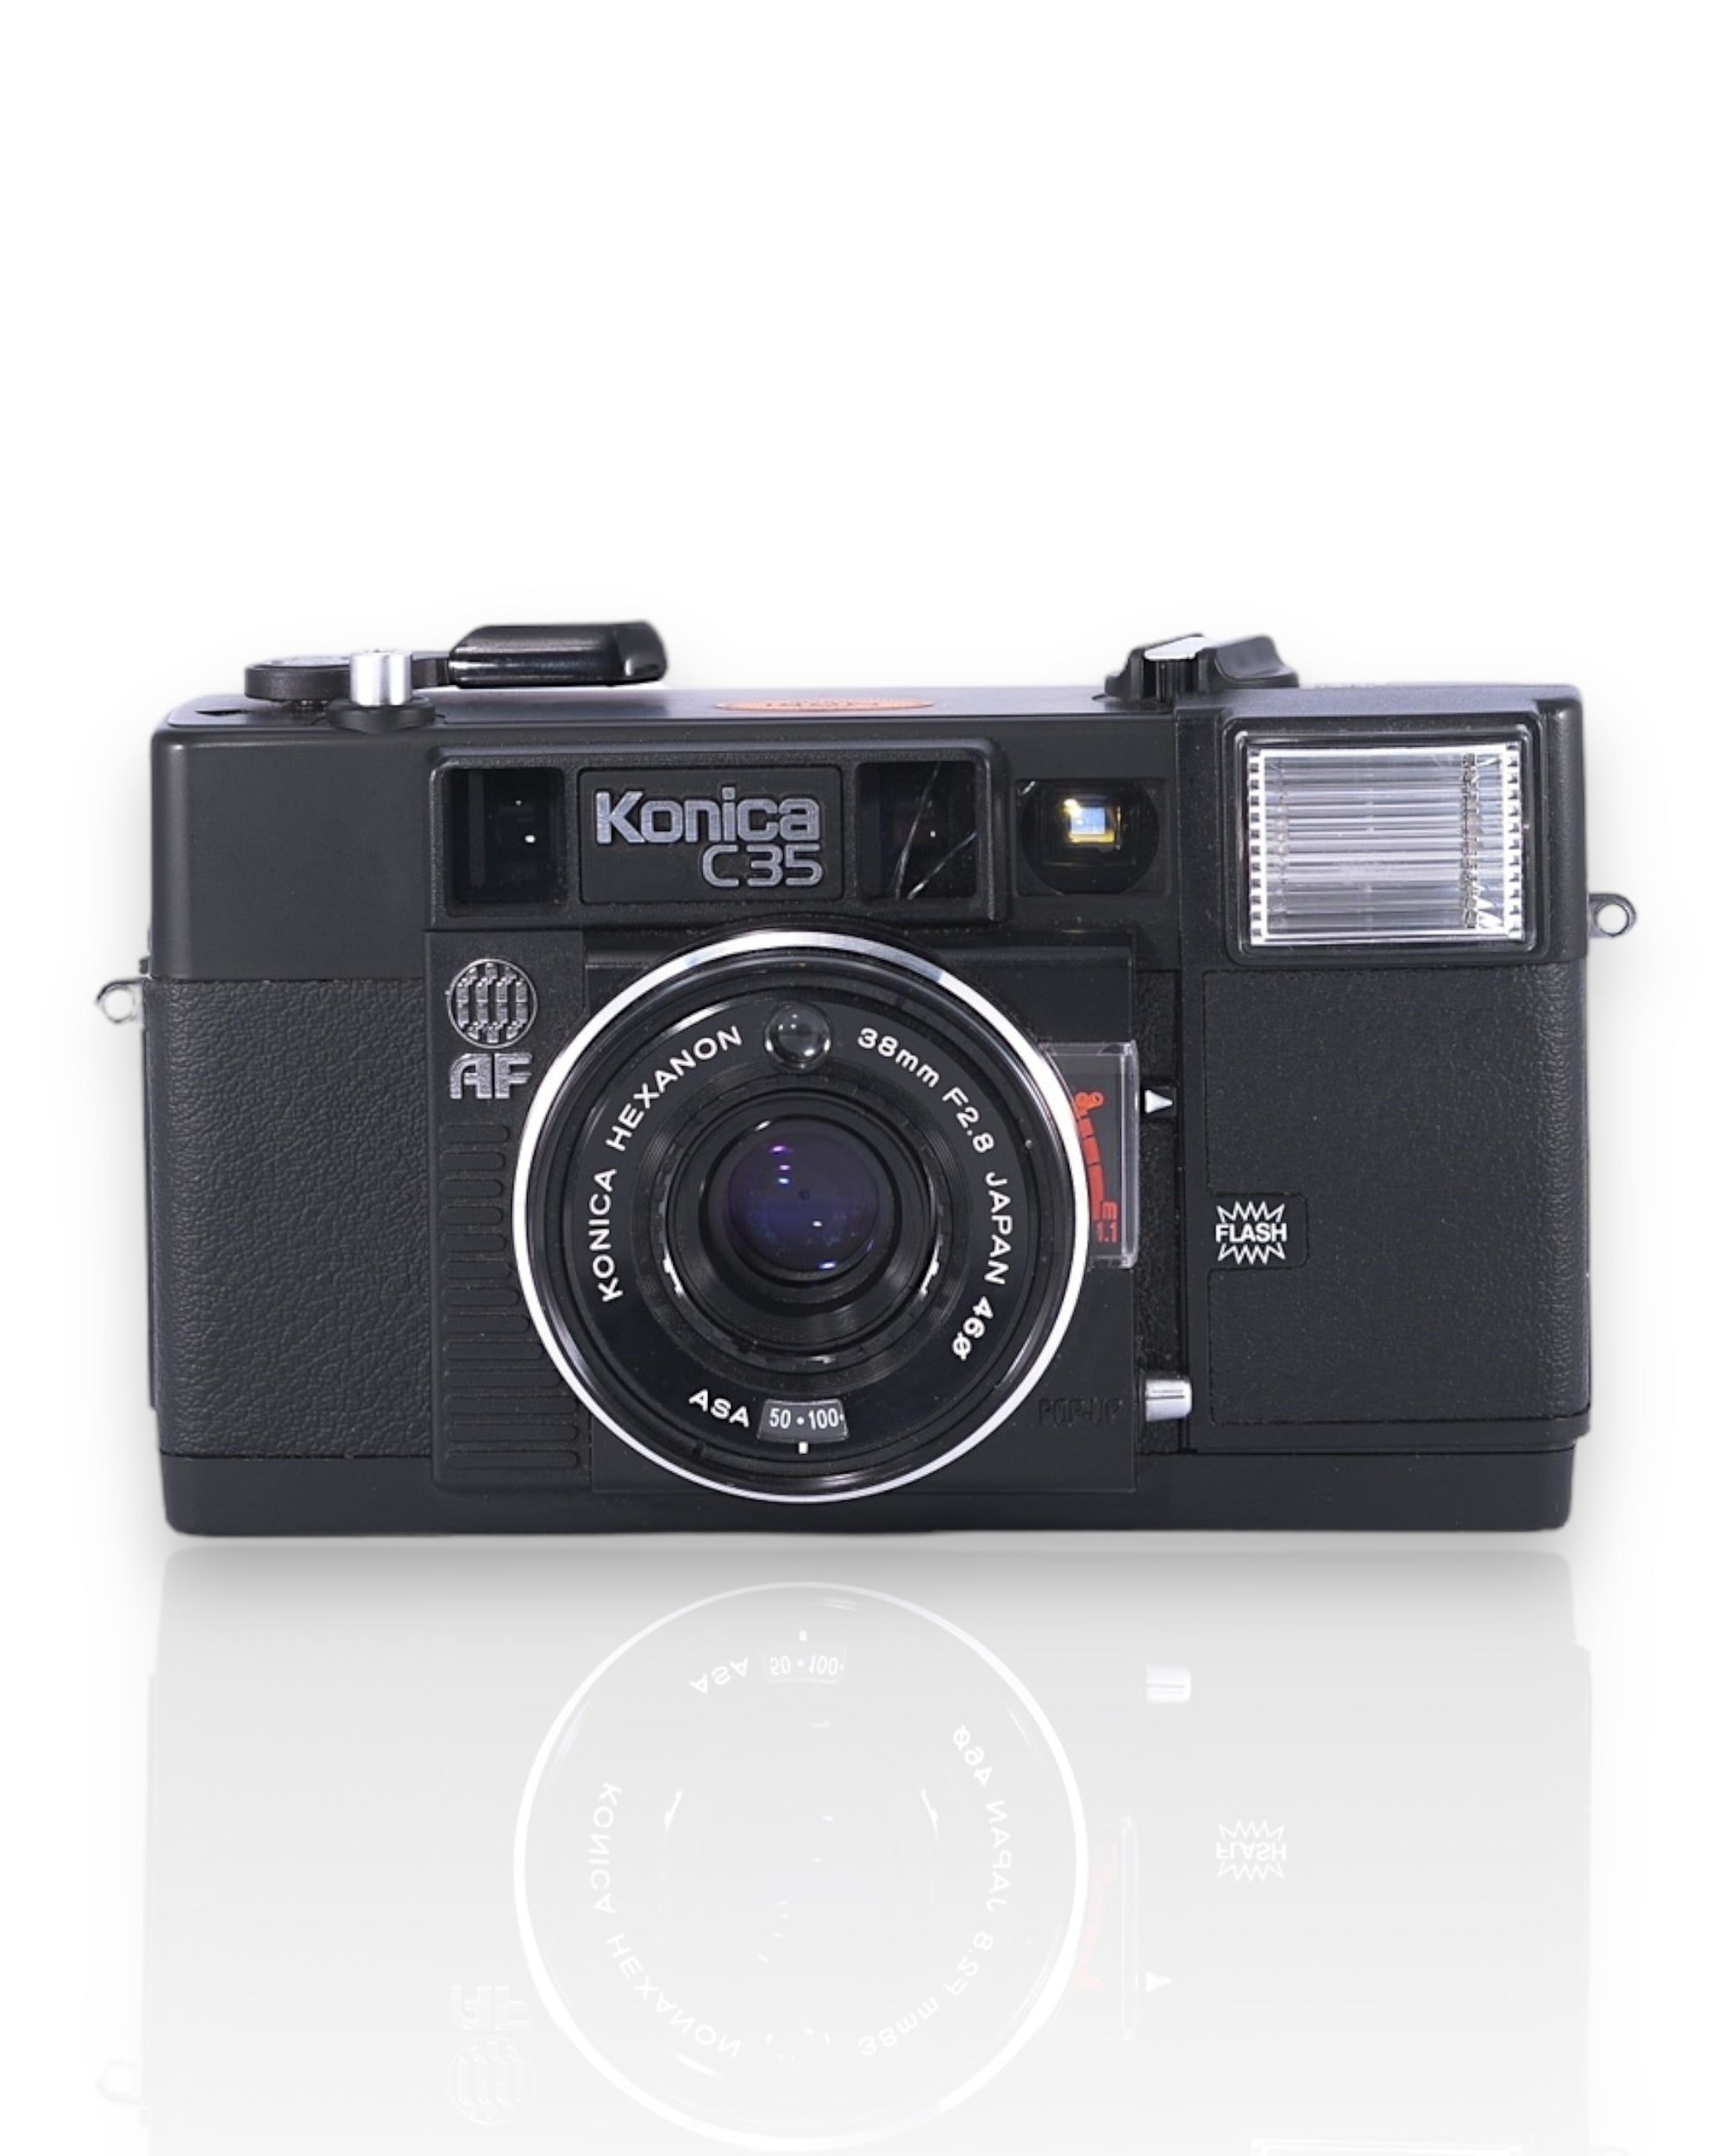 Konica C35 EF 35mm Point & Shoot film camera with 35mm f2.8 lens